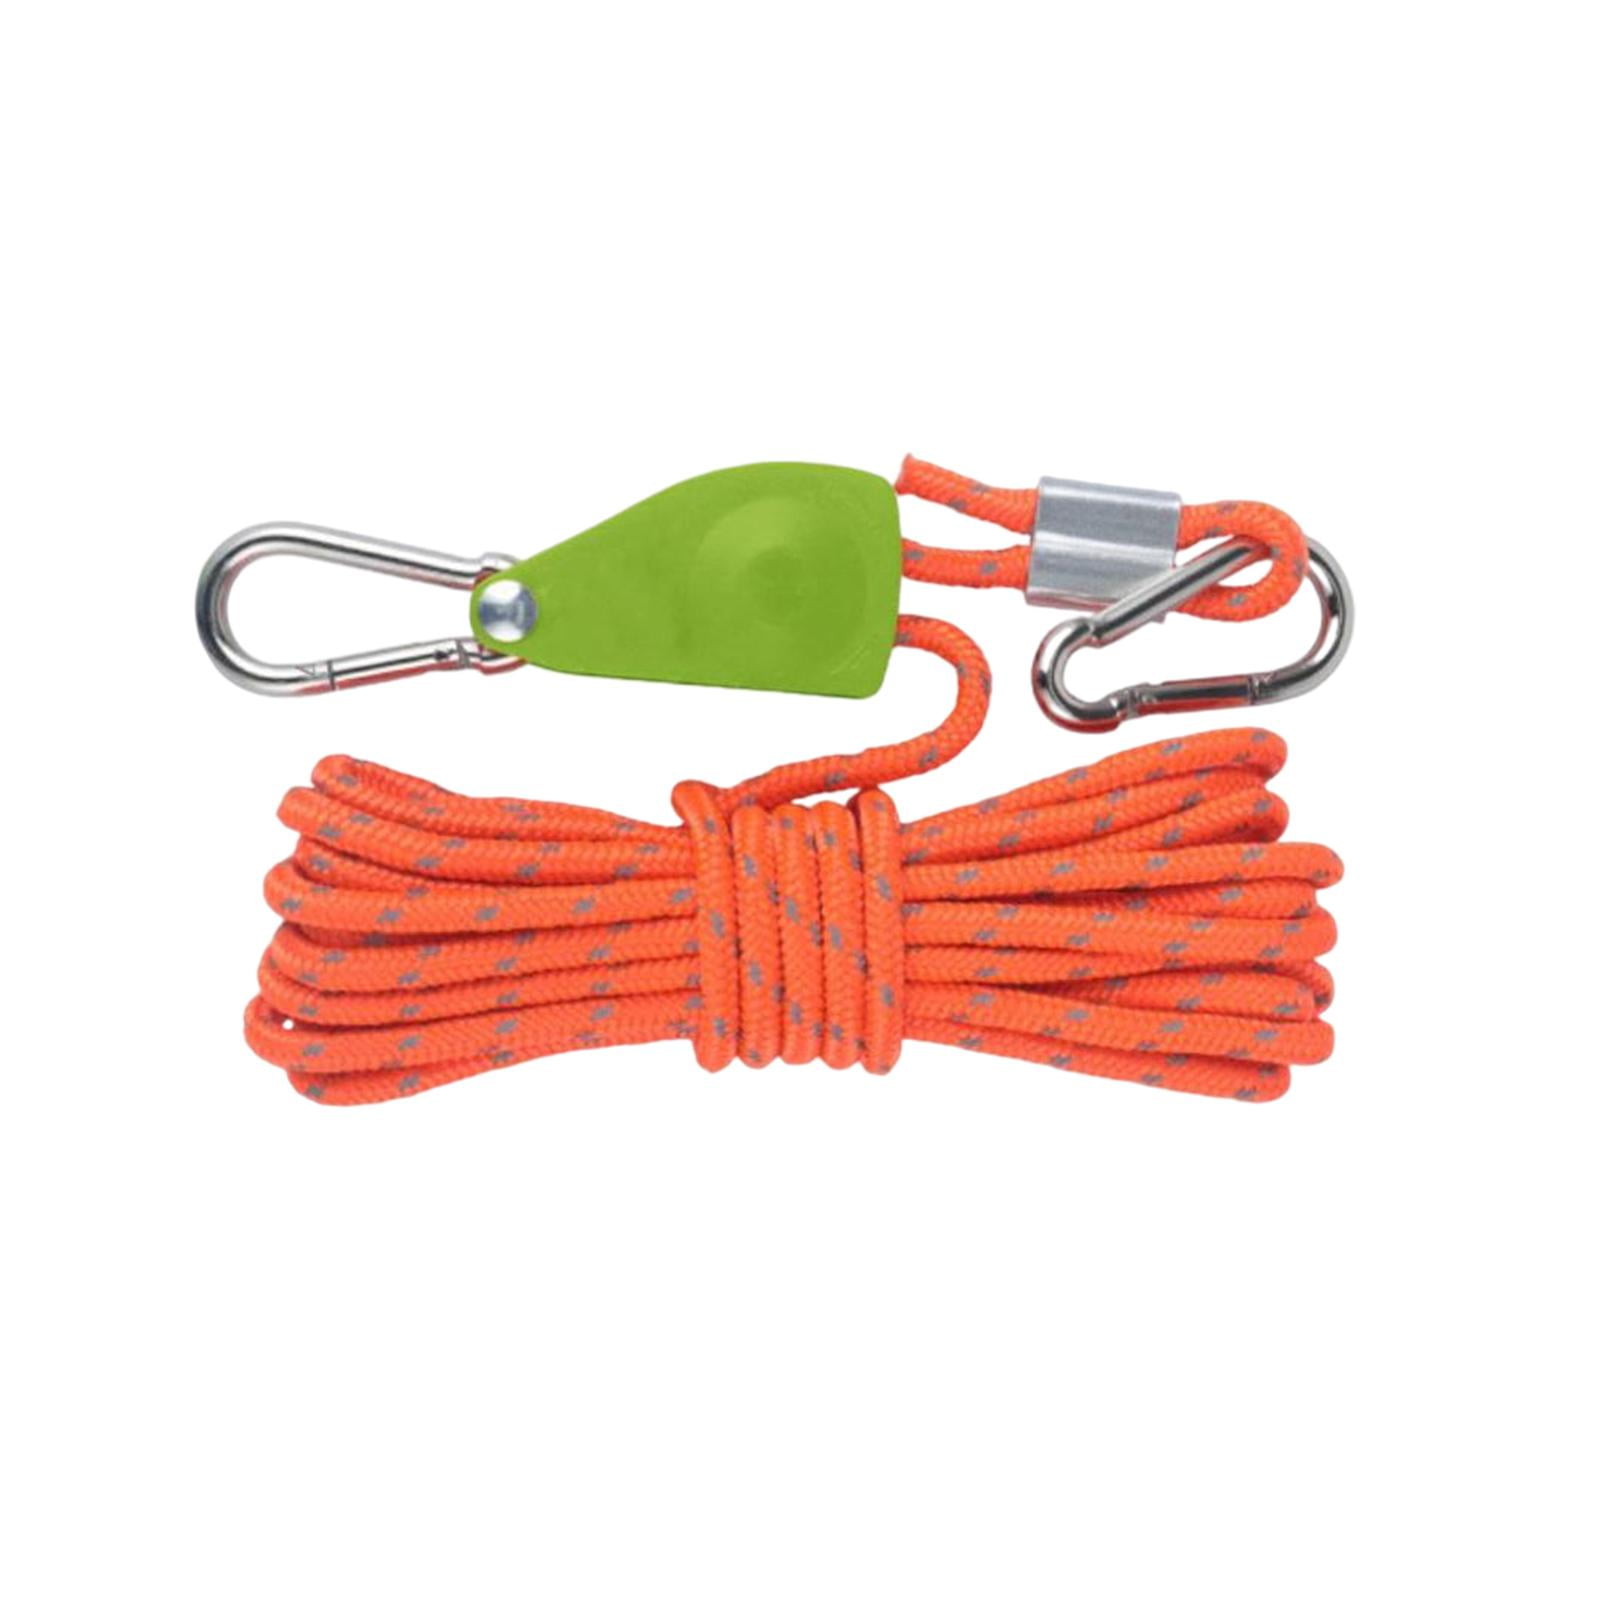 Camping Tent Rope,Outdoor Guy Lines with Ratchet Pulley, Camping